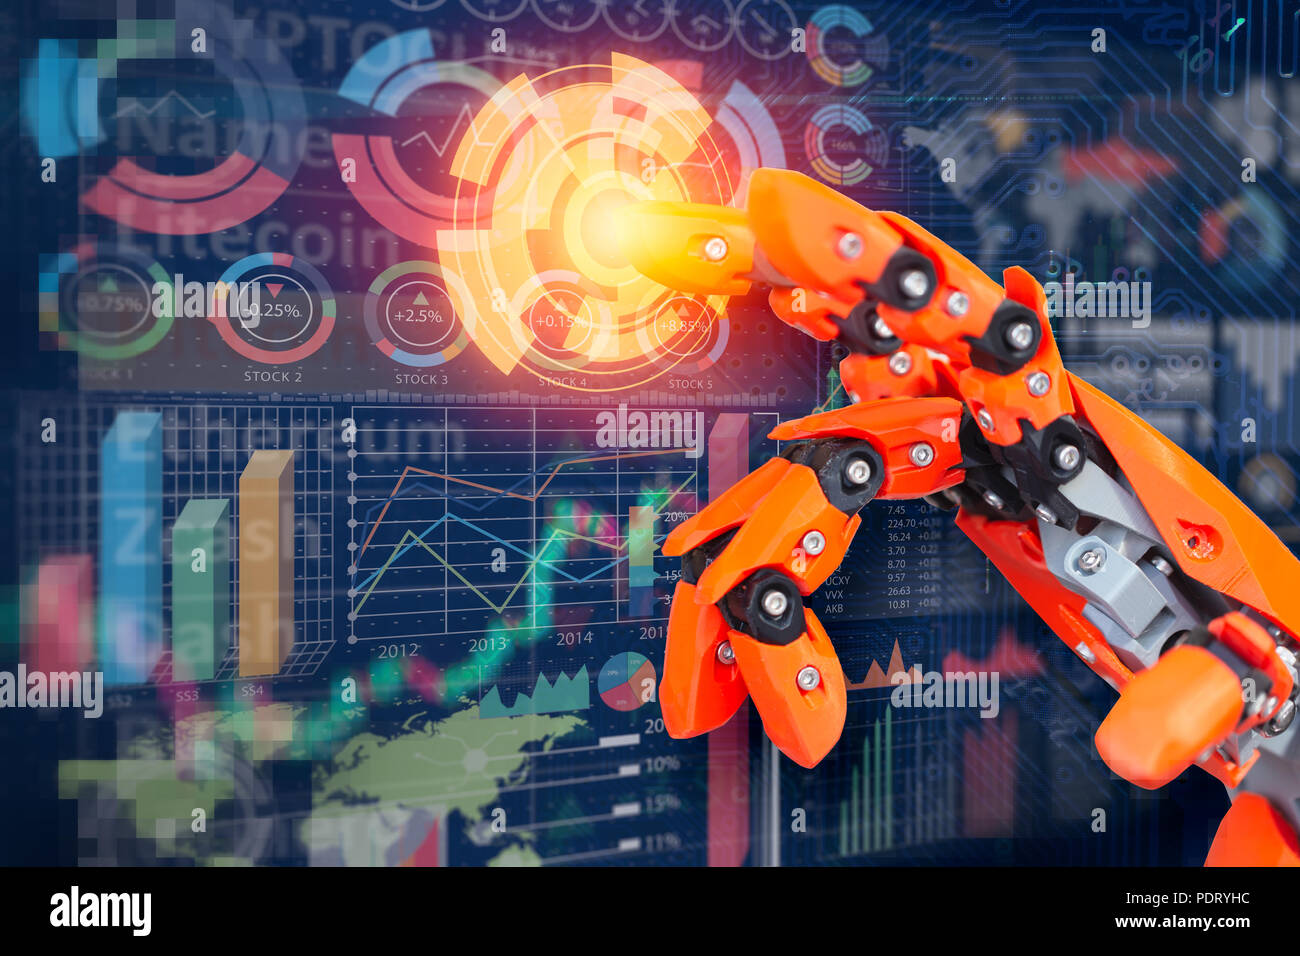 Robot finger touch mix media panel display business data infographic for futuristic cyber aged of modern technology concept. Stock Photo